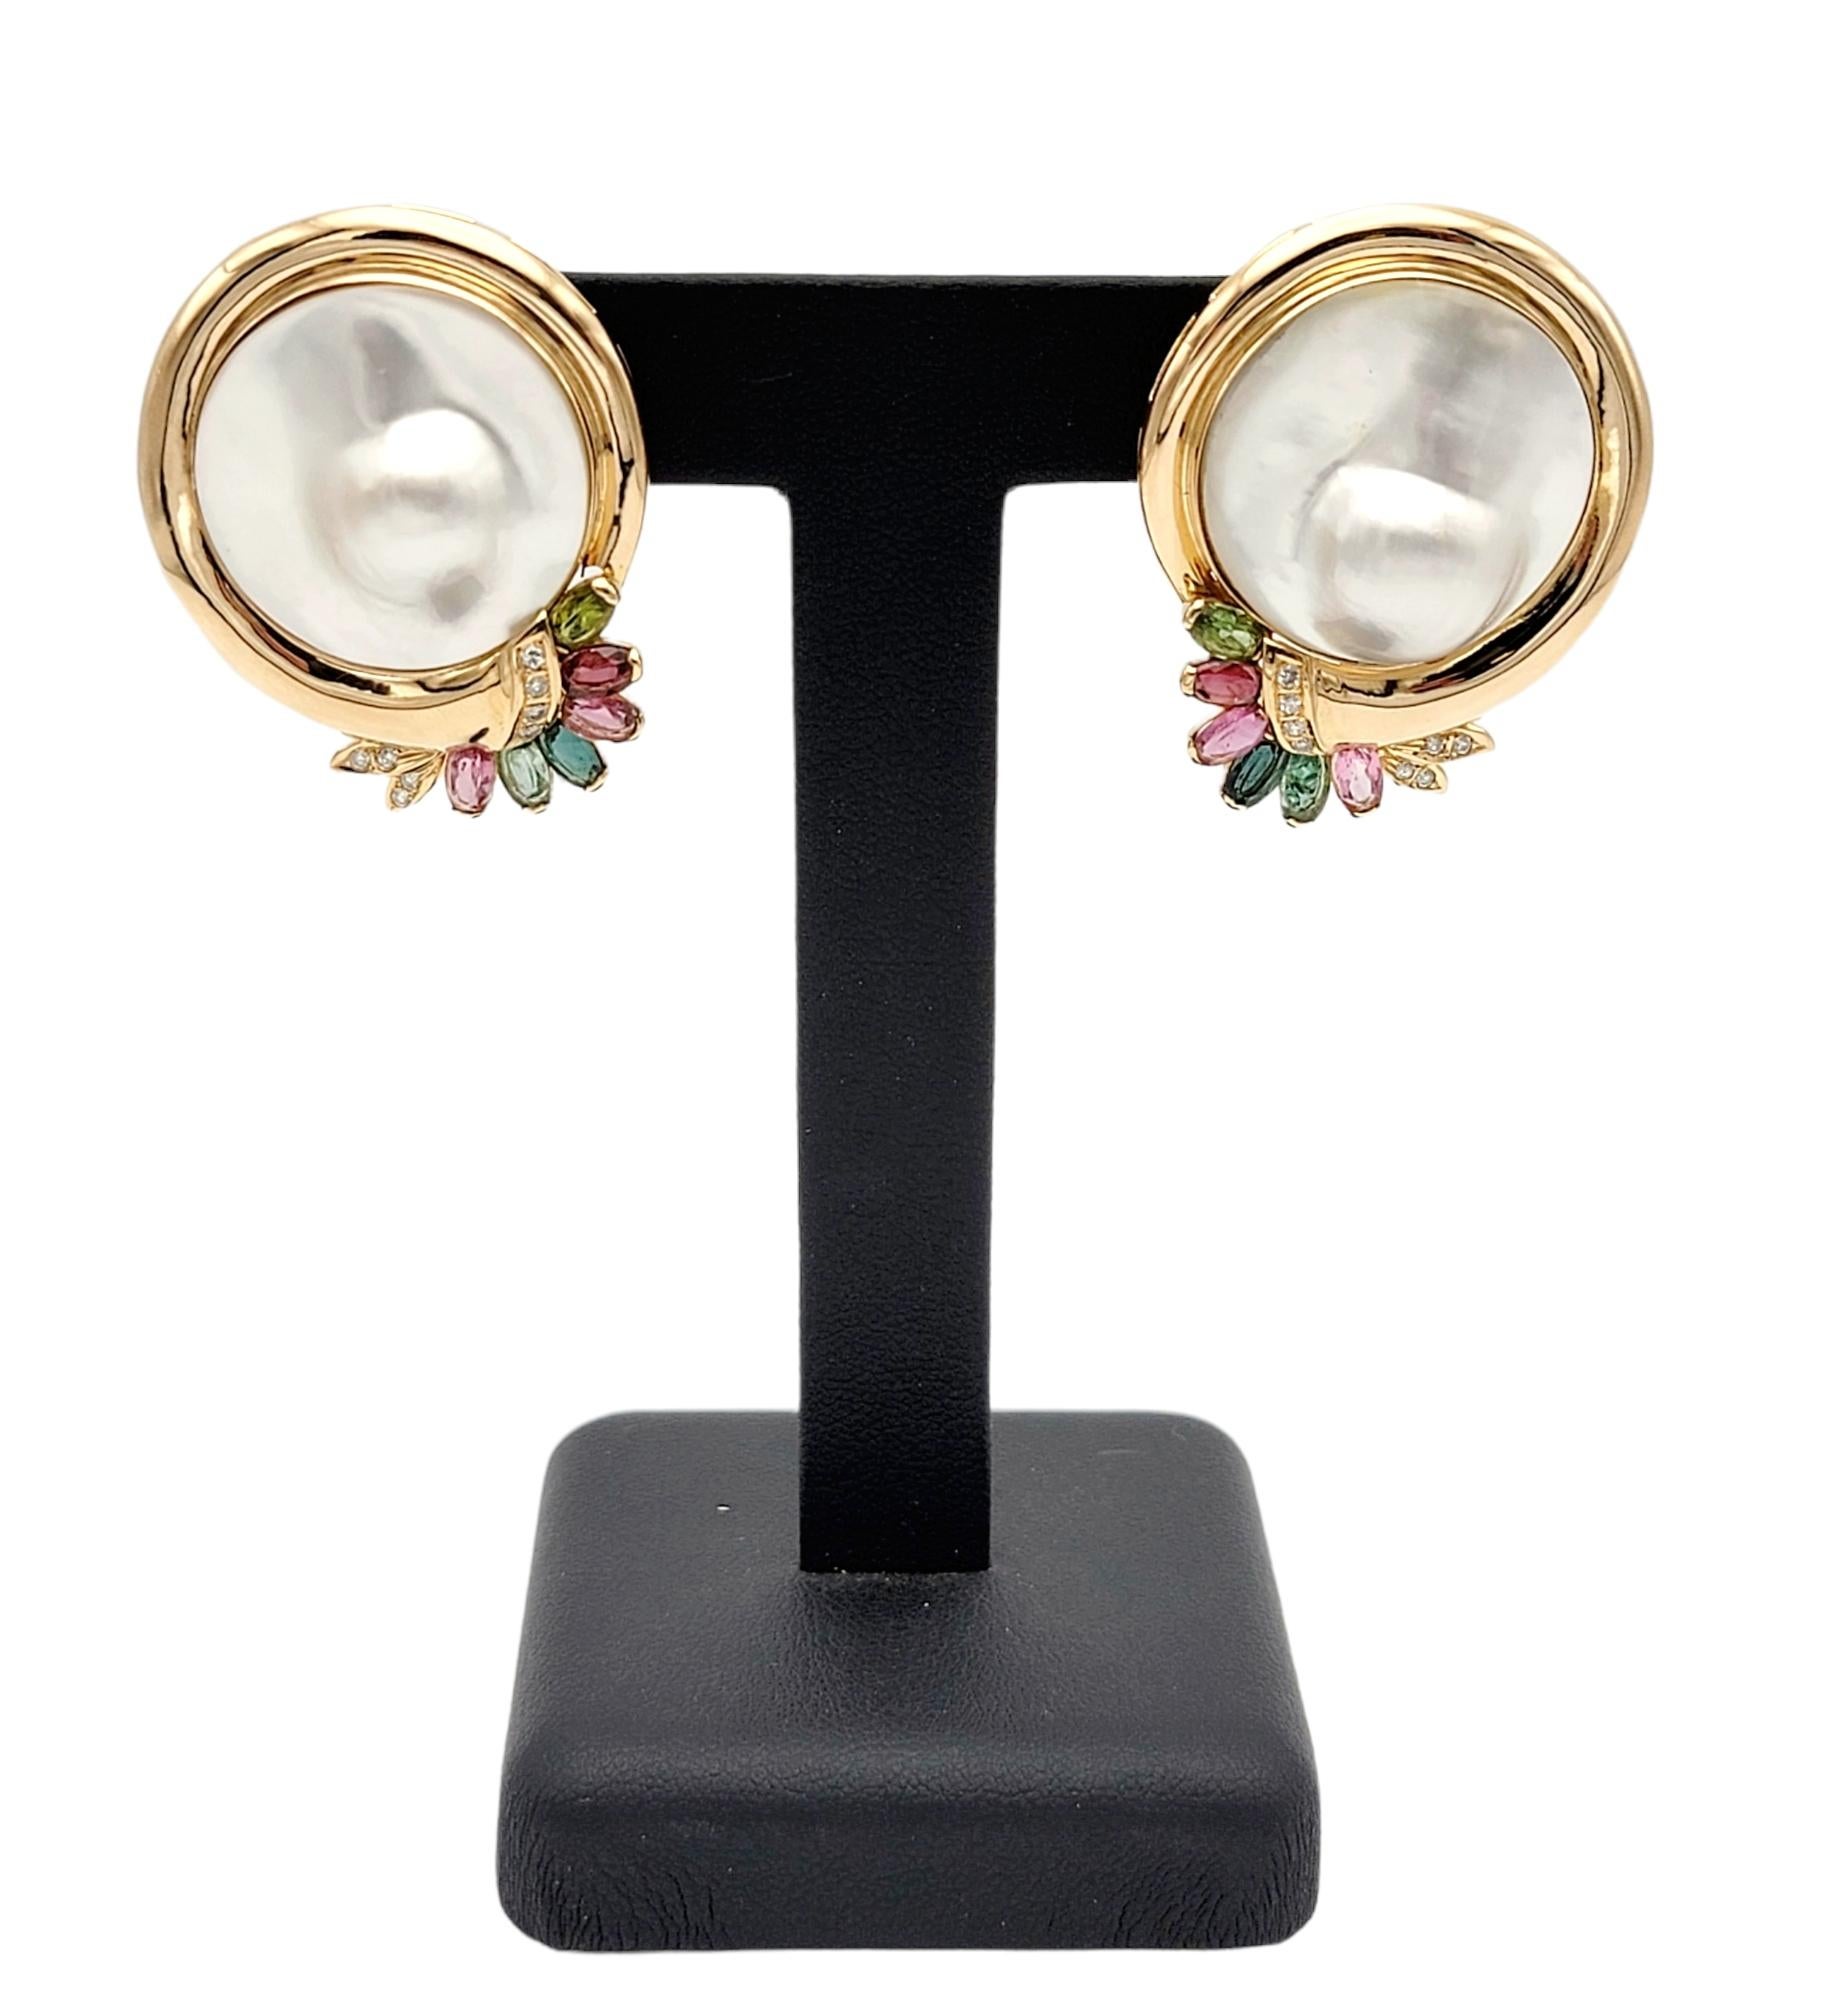 Women's Cultured Mabe Blistered Pearl 14 Karat Gold Earrings with Diamonds and Gemstones For Sale